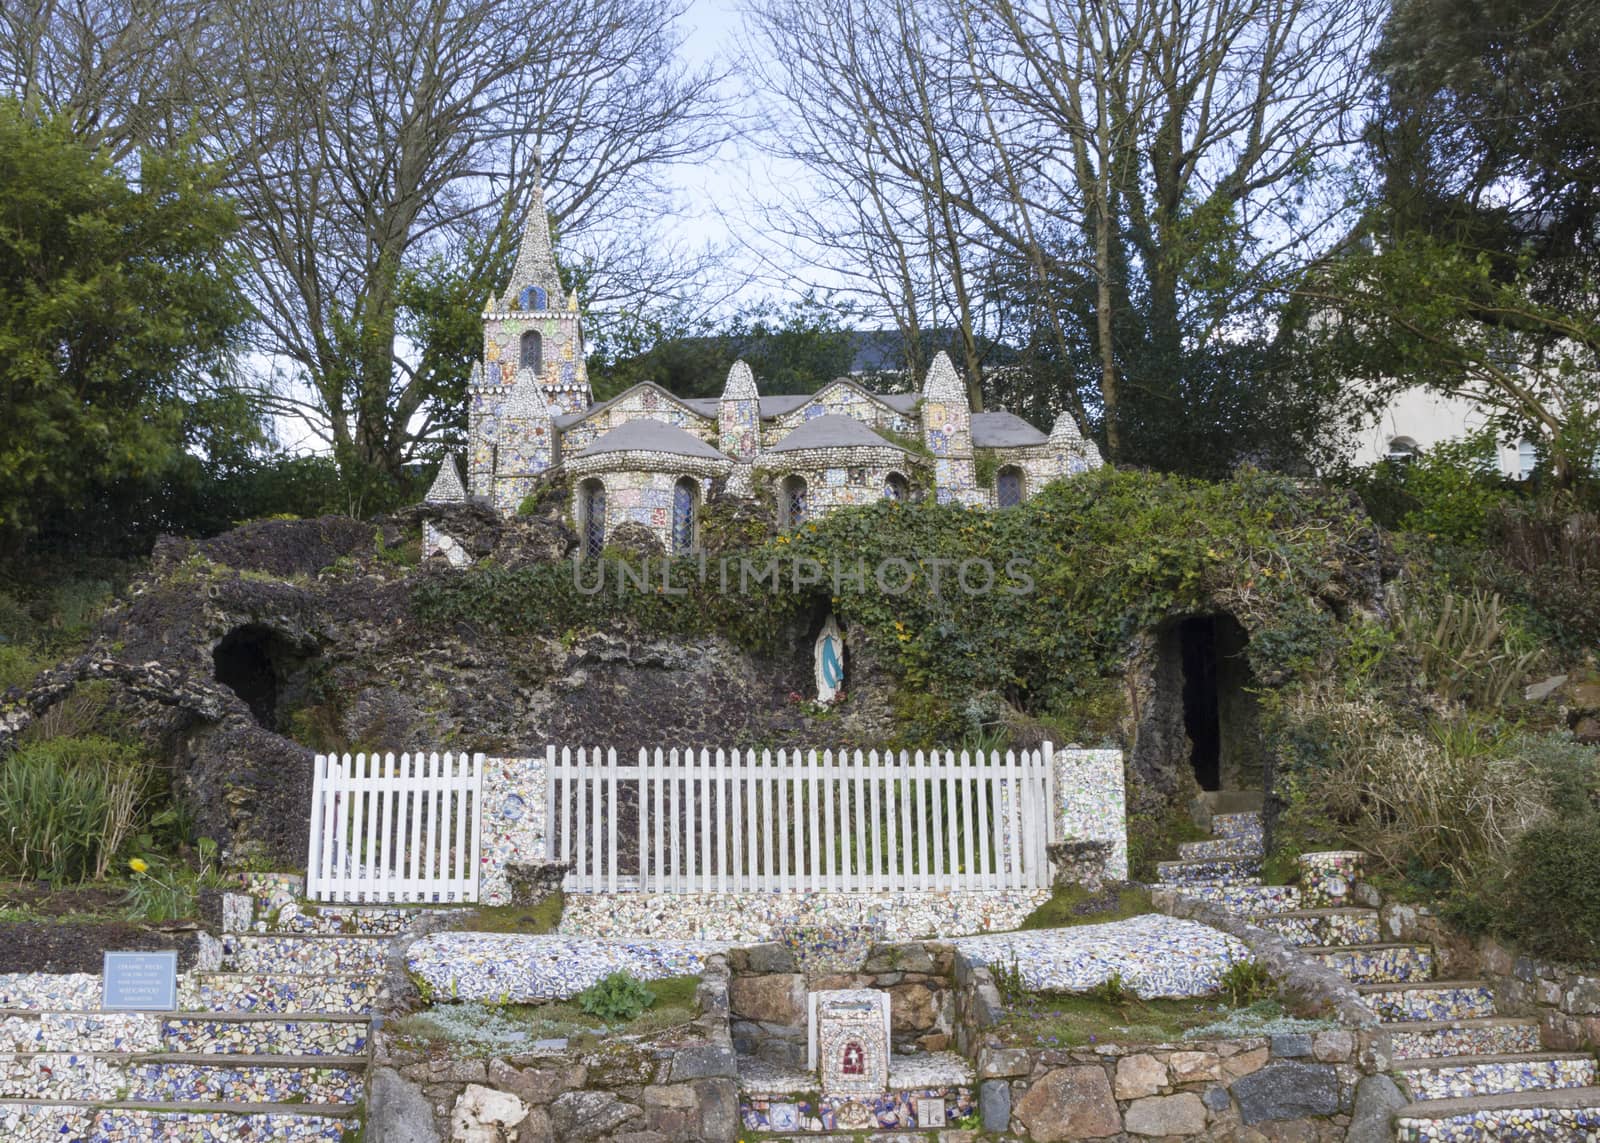 Little Chapel (Brother Deodat, 1914) in Saint Peter Port is possibly the smallest chapel in the world - miniature version of famous grotto
 and basilica at Lourdes in France. Guernsey, English Channel.